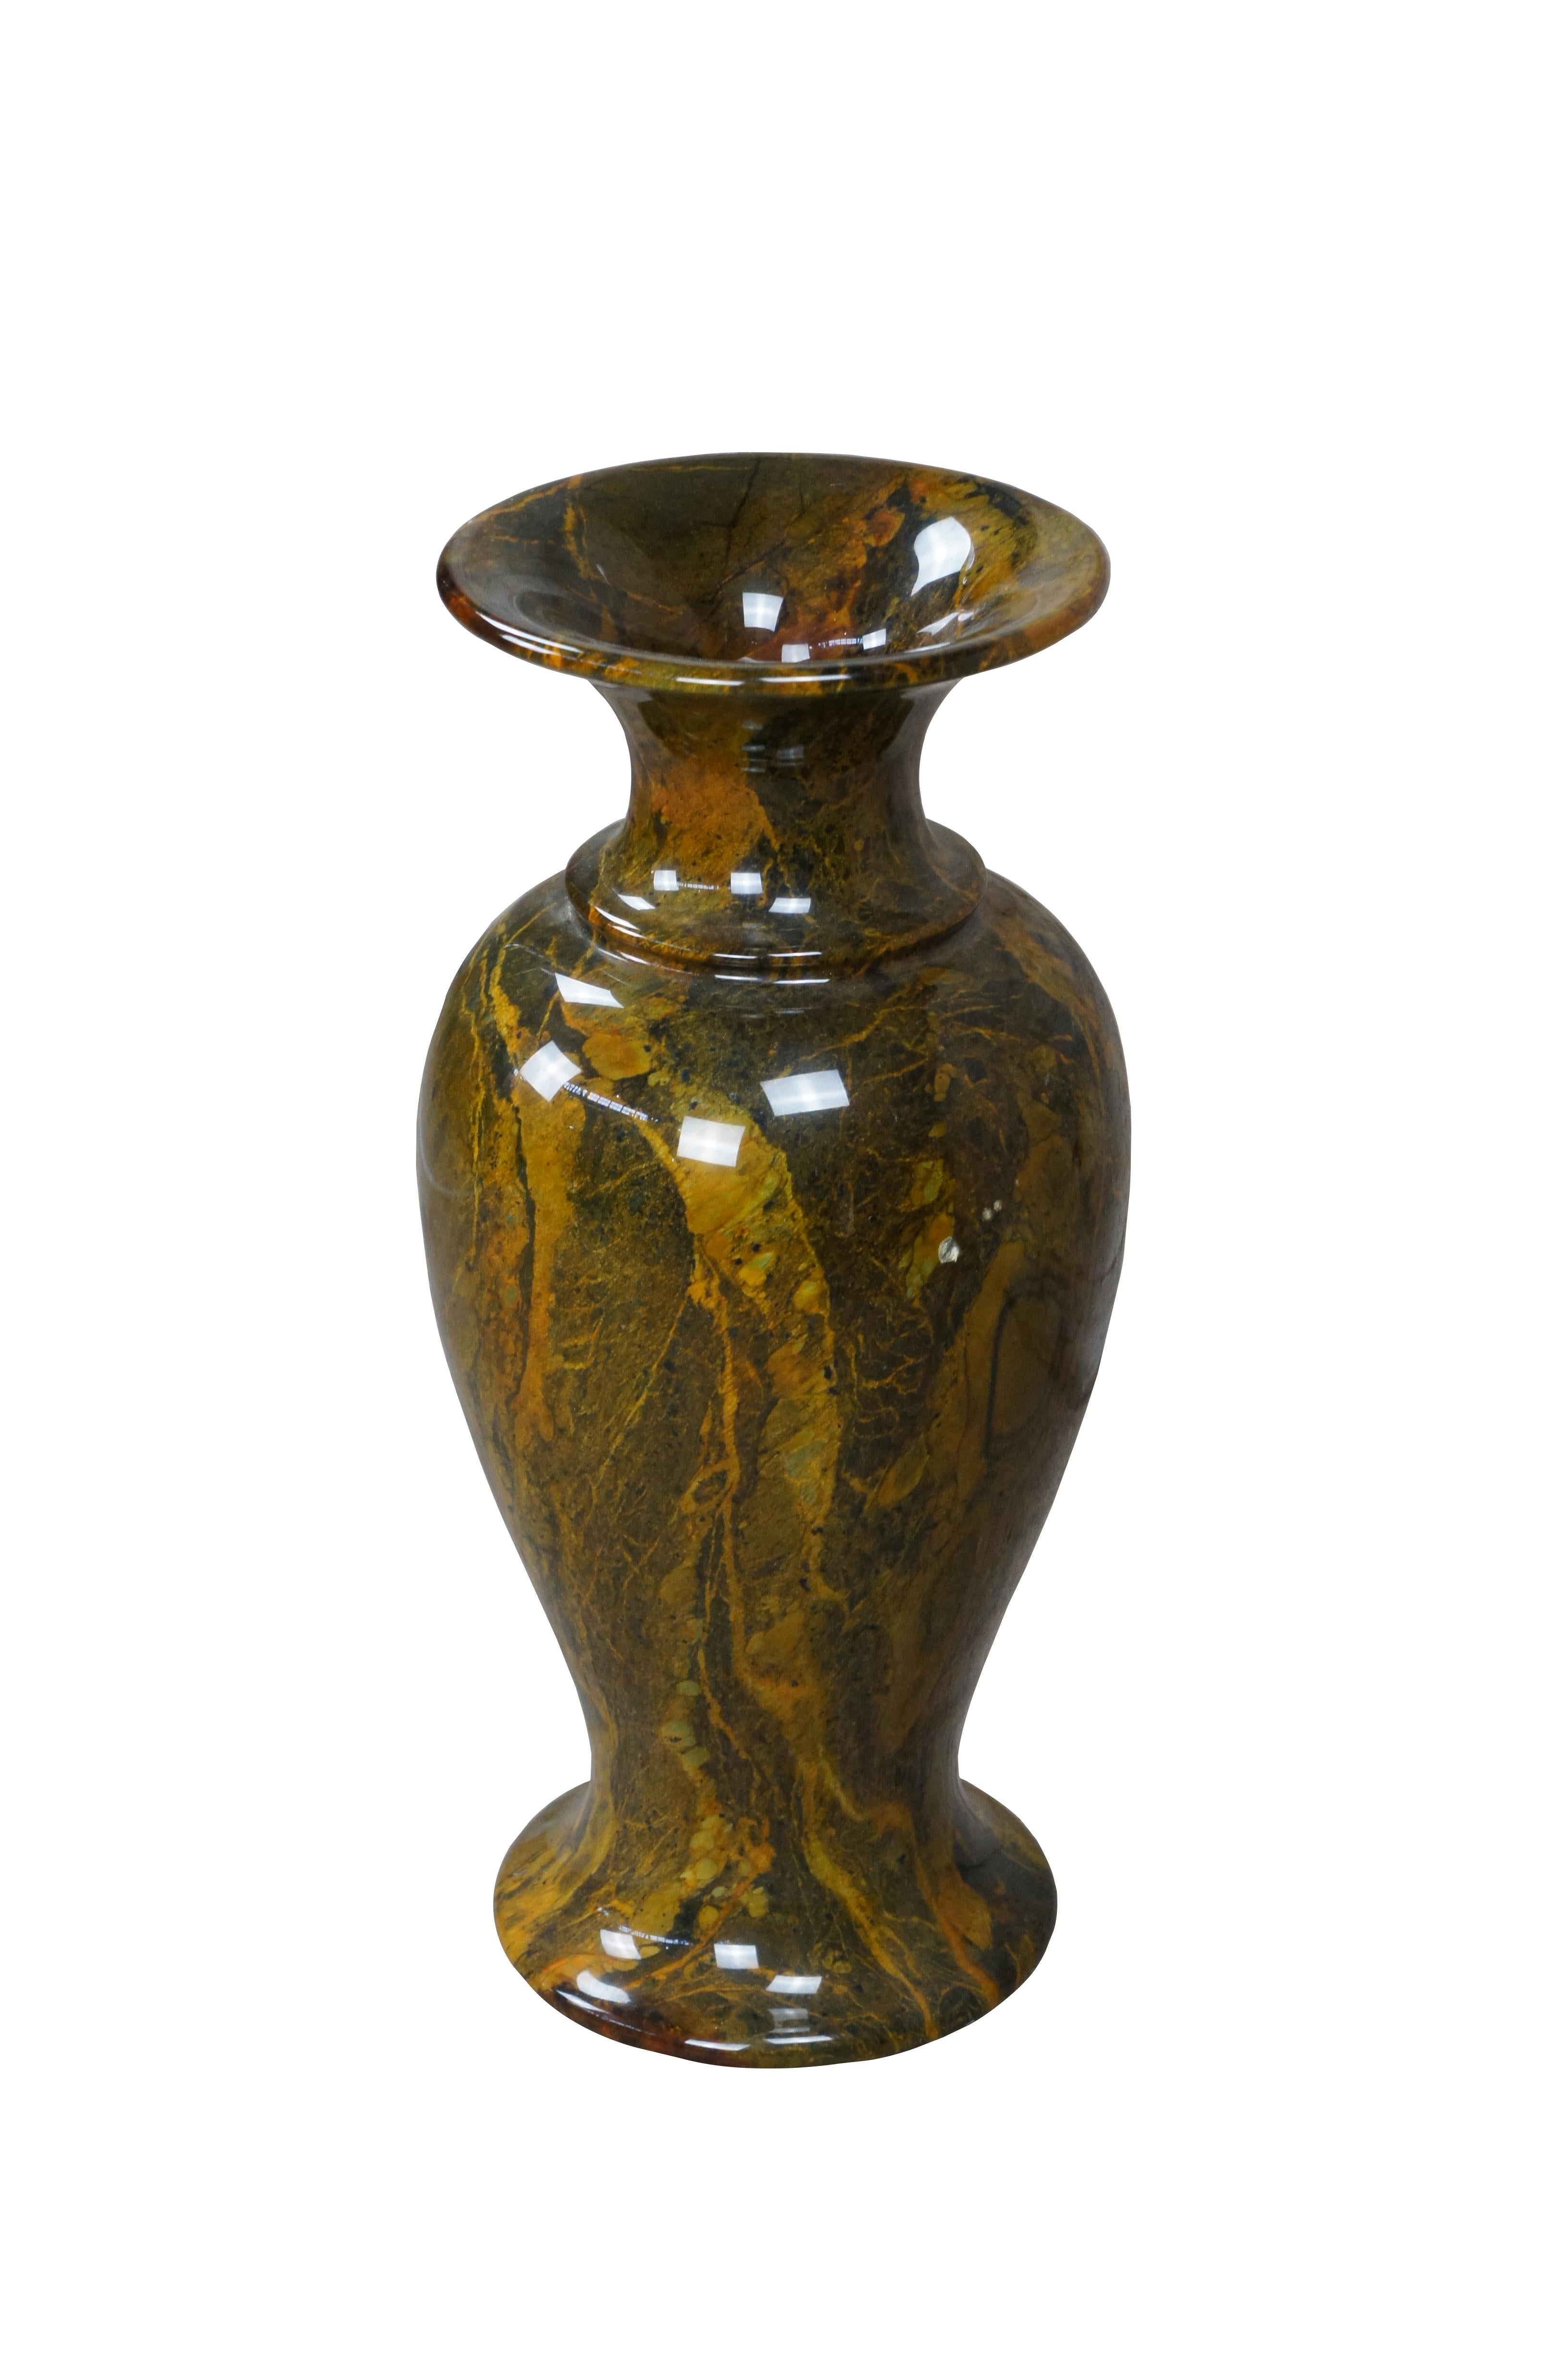 Large 20th century Neoclassical jade marble vase. Features a greenish yellow tone with beautiful color and patina.

Dimensions:
10.5